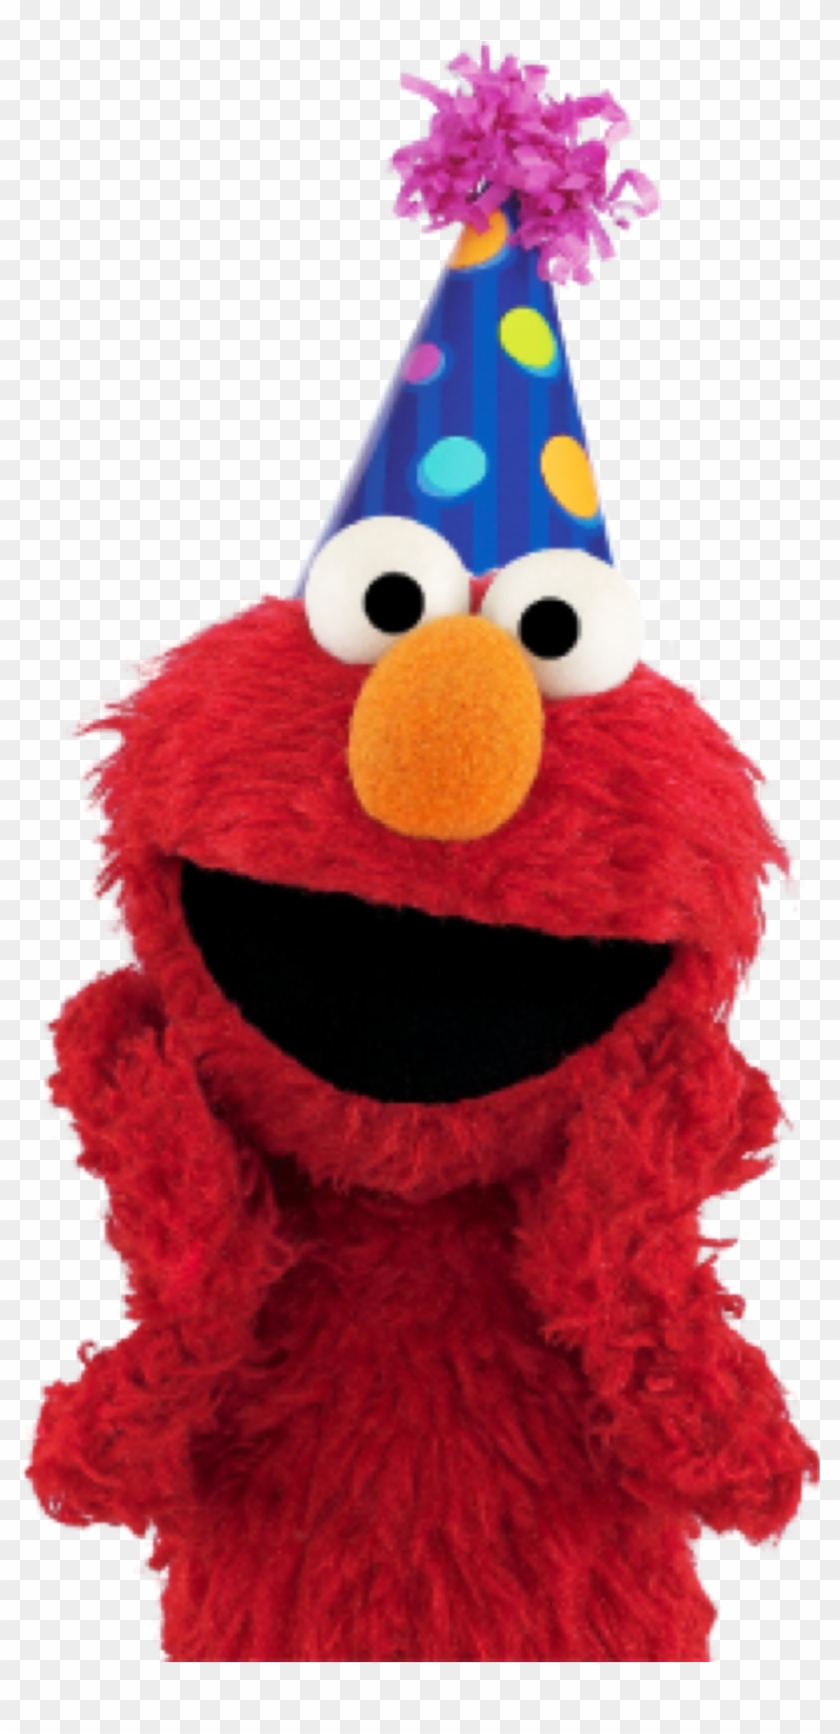 Elmo With Birthday Hat, HD Png Download.